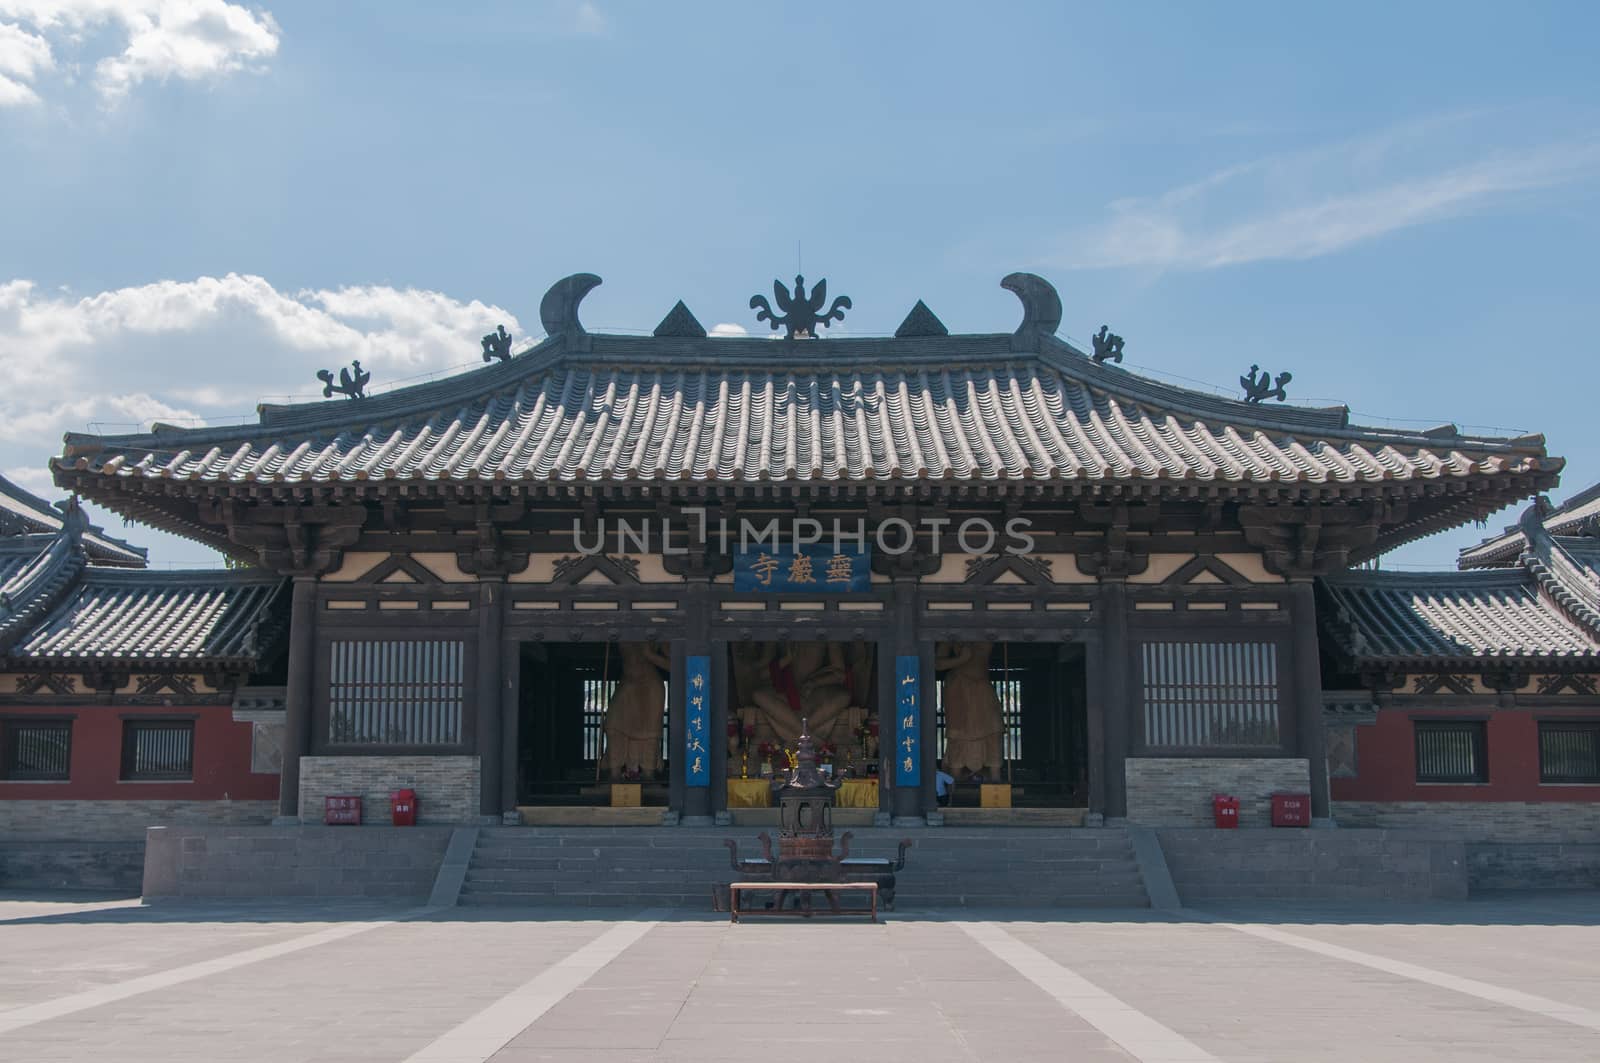 The horizontal view of the Chinese temple